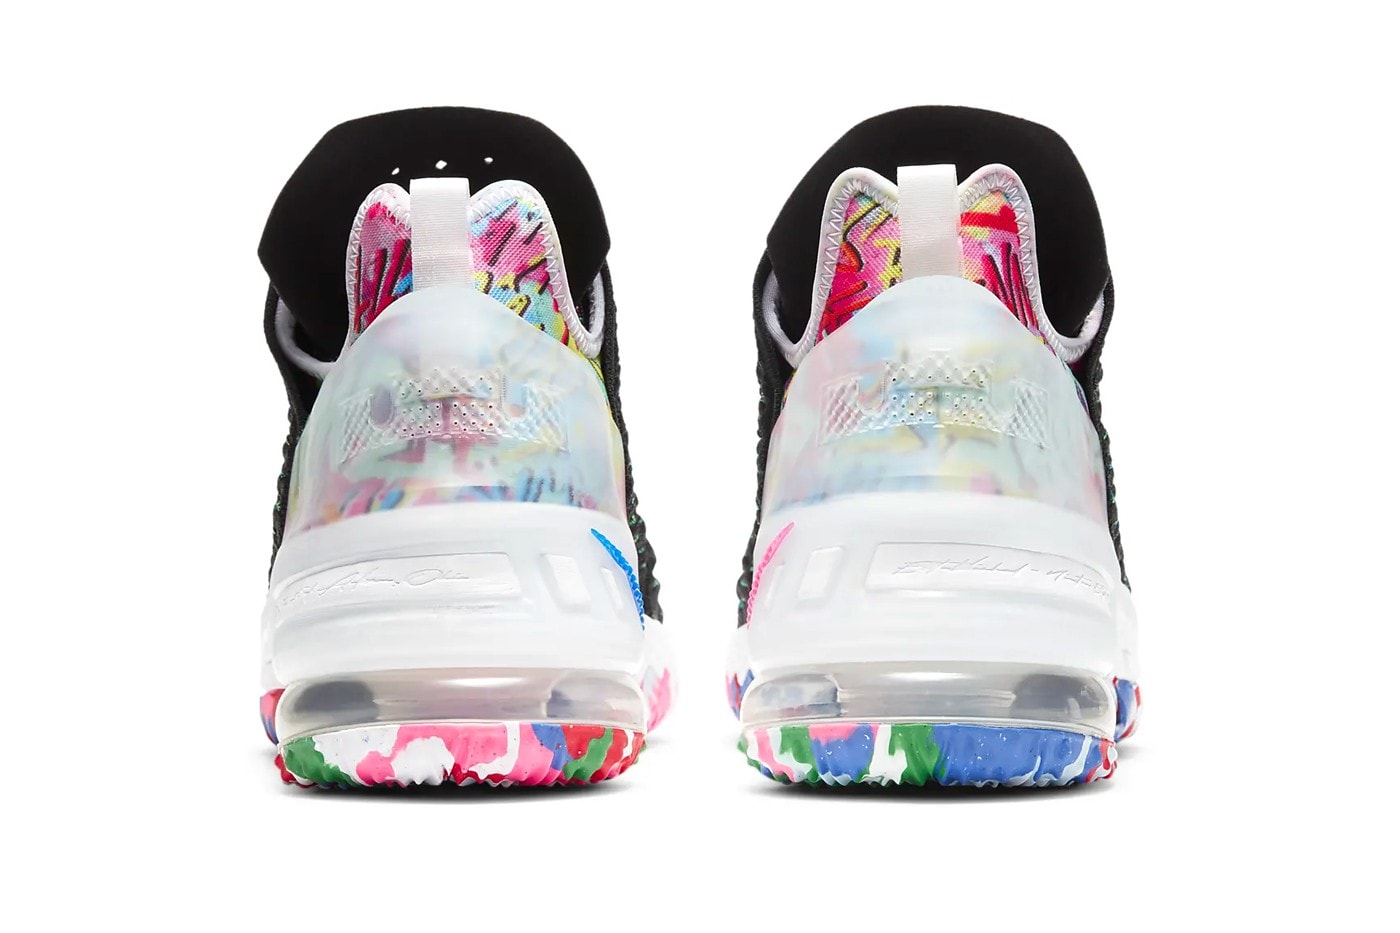 Nike LeBron 18 最新配色「Multi-Color」、「Reflections」官方圖輯發佈